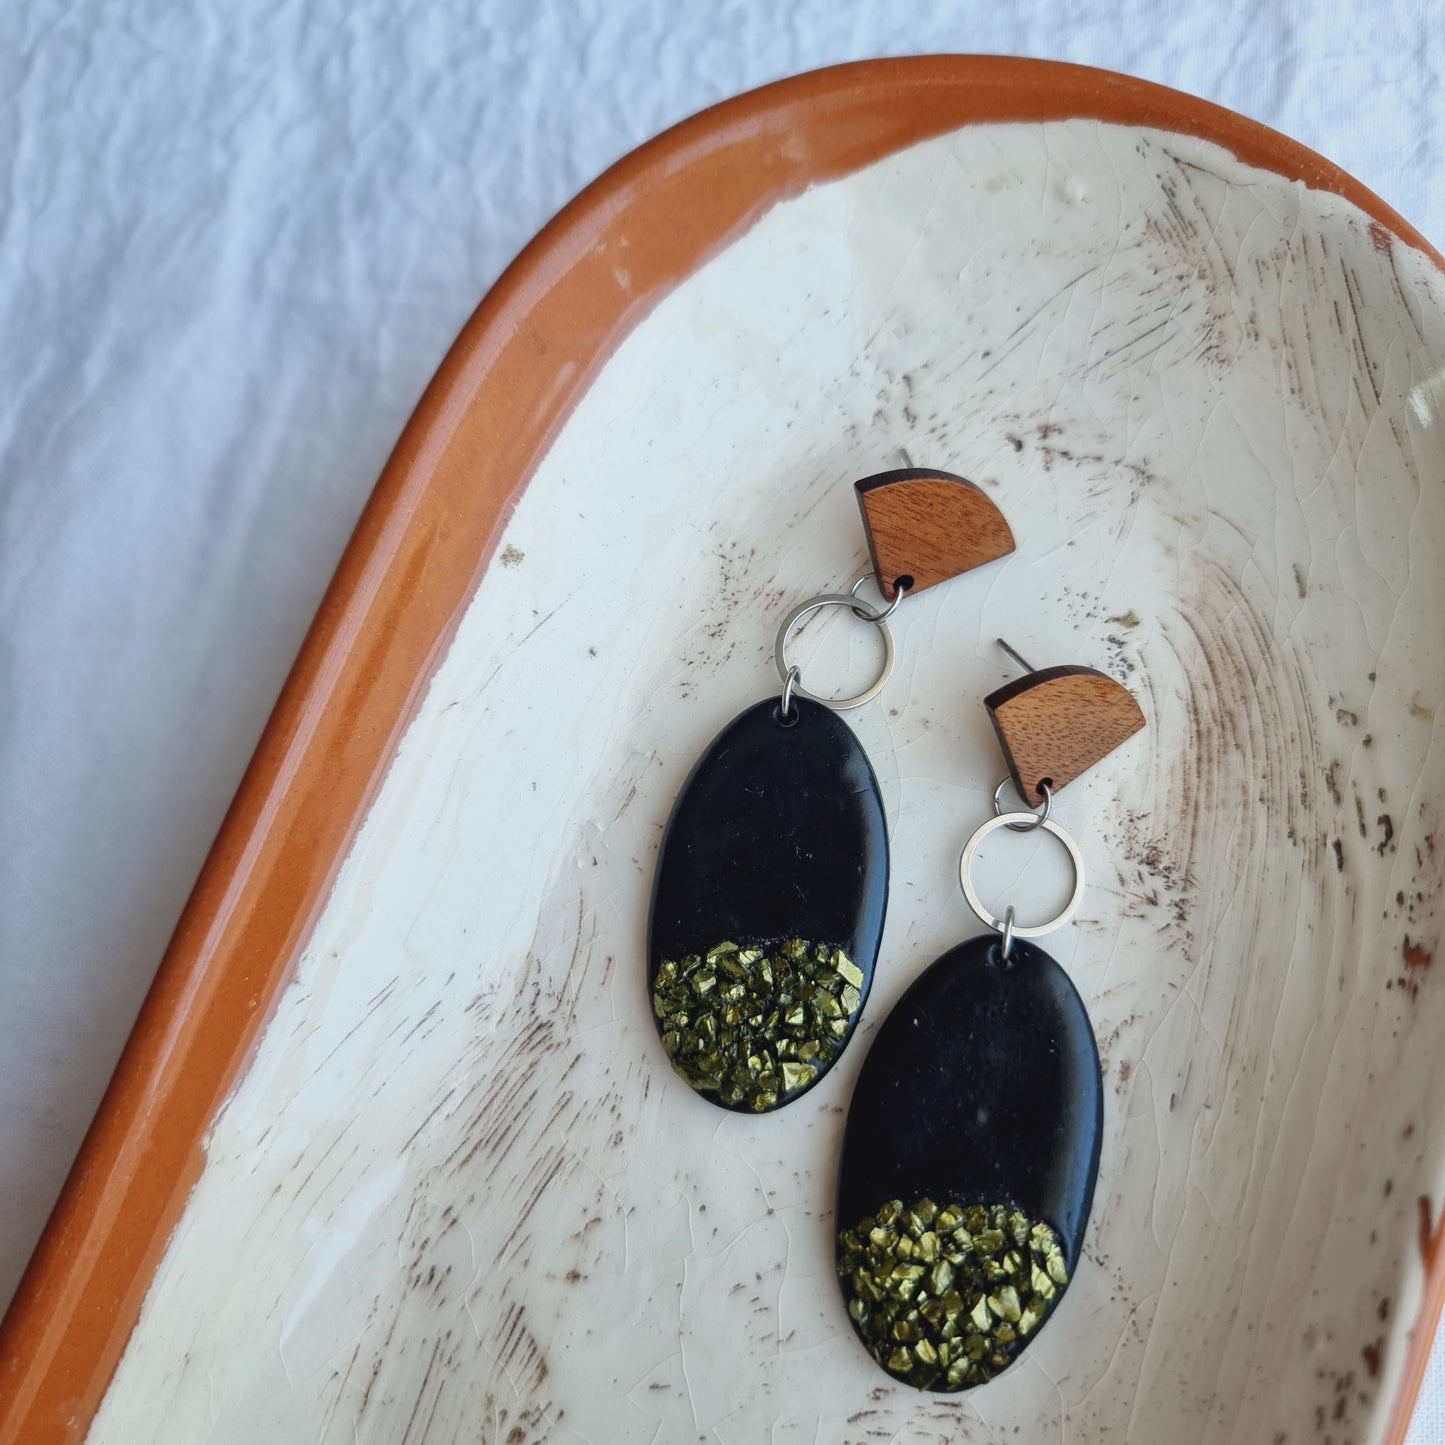 Elegant and unique, these handmade Polymer Clay Earrings bring luxury sophistication to any look. Crafted from oval black polymer clay with golden chips